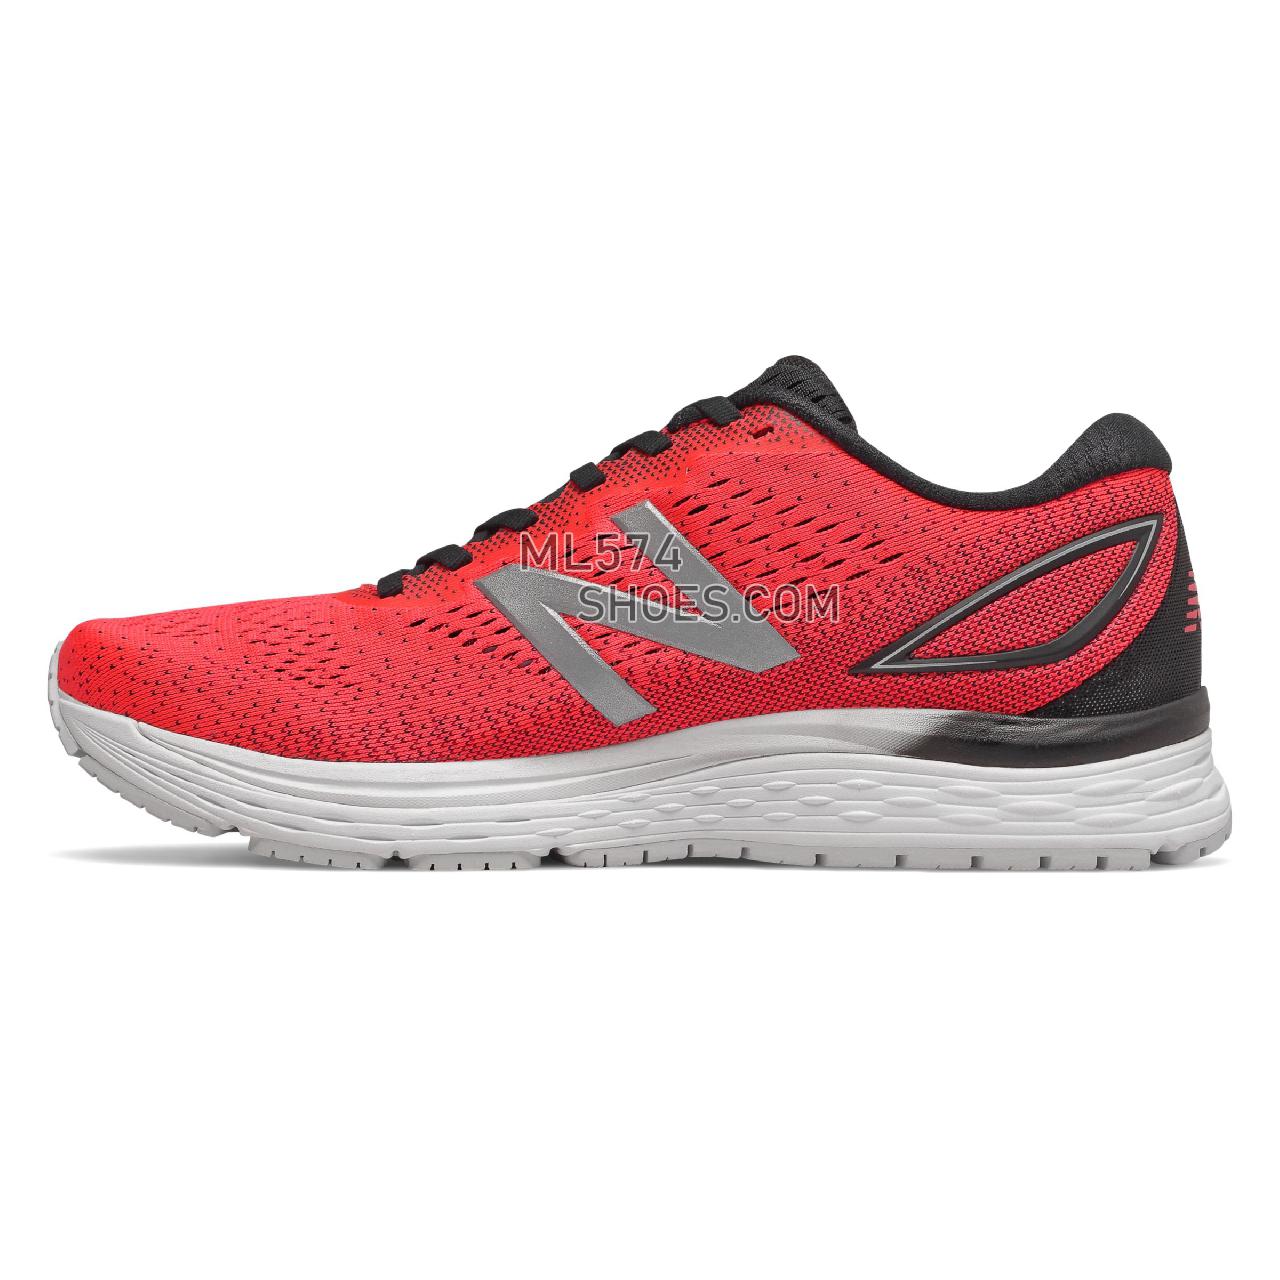 New Balance 880v9 - Men's Neutral Running - Energy Red with Black and White - M880RW9